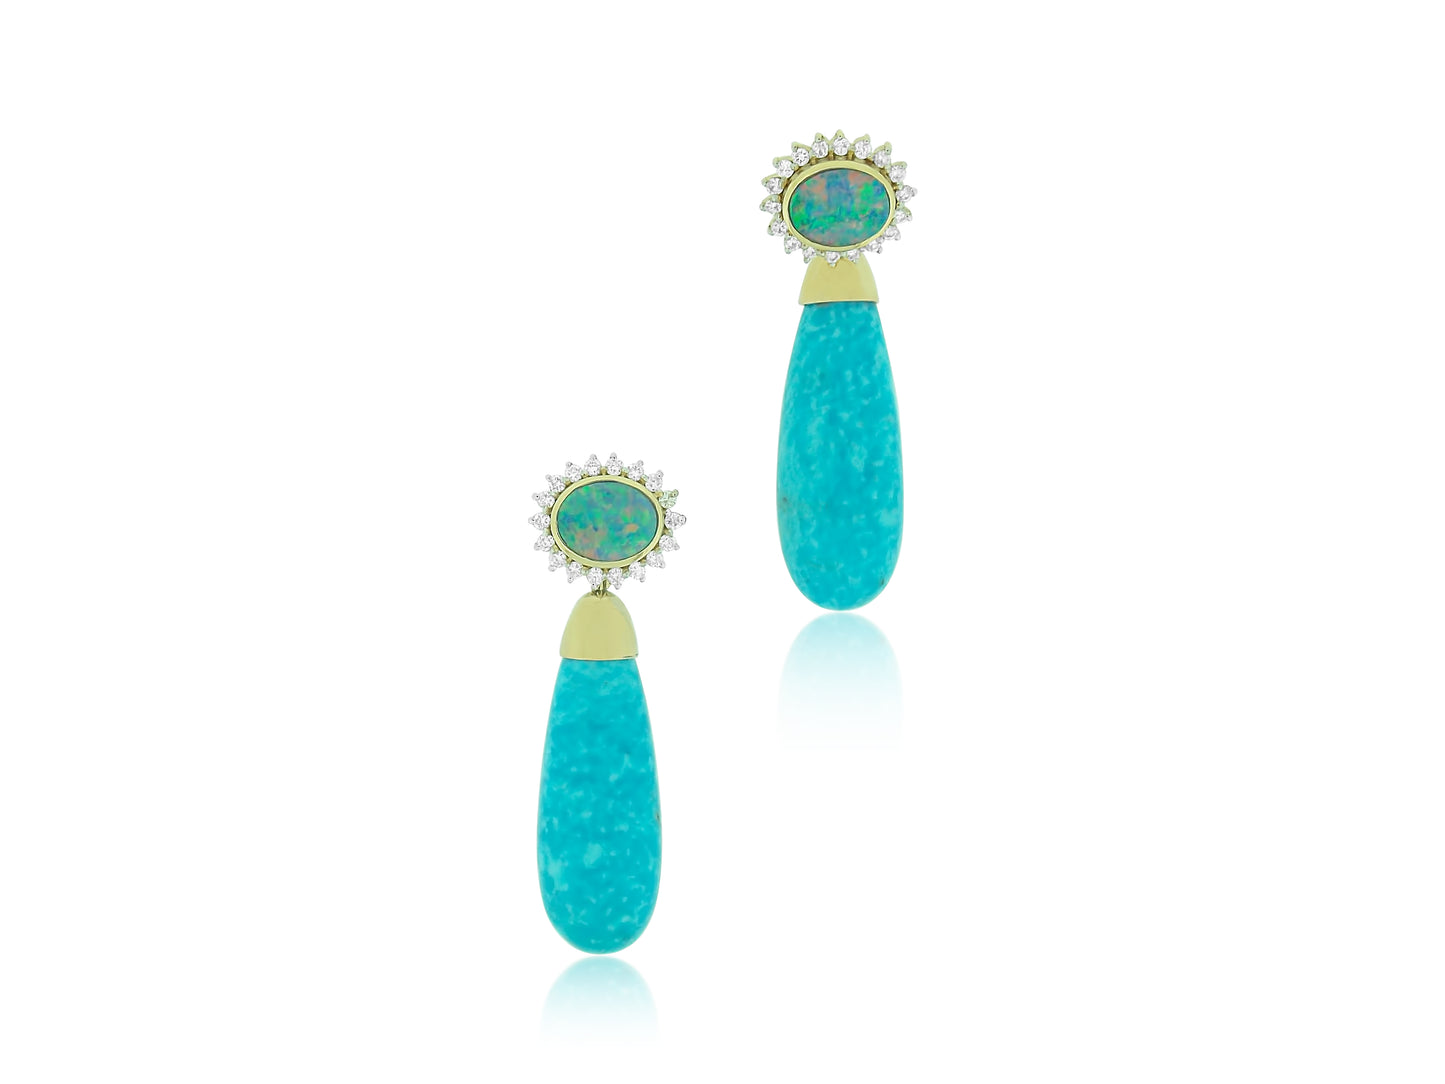 Opal Earrings with Removable Turquoise Drops